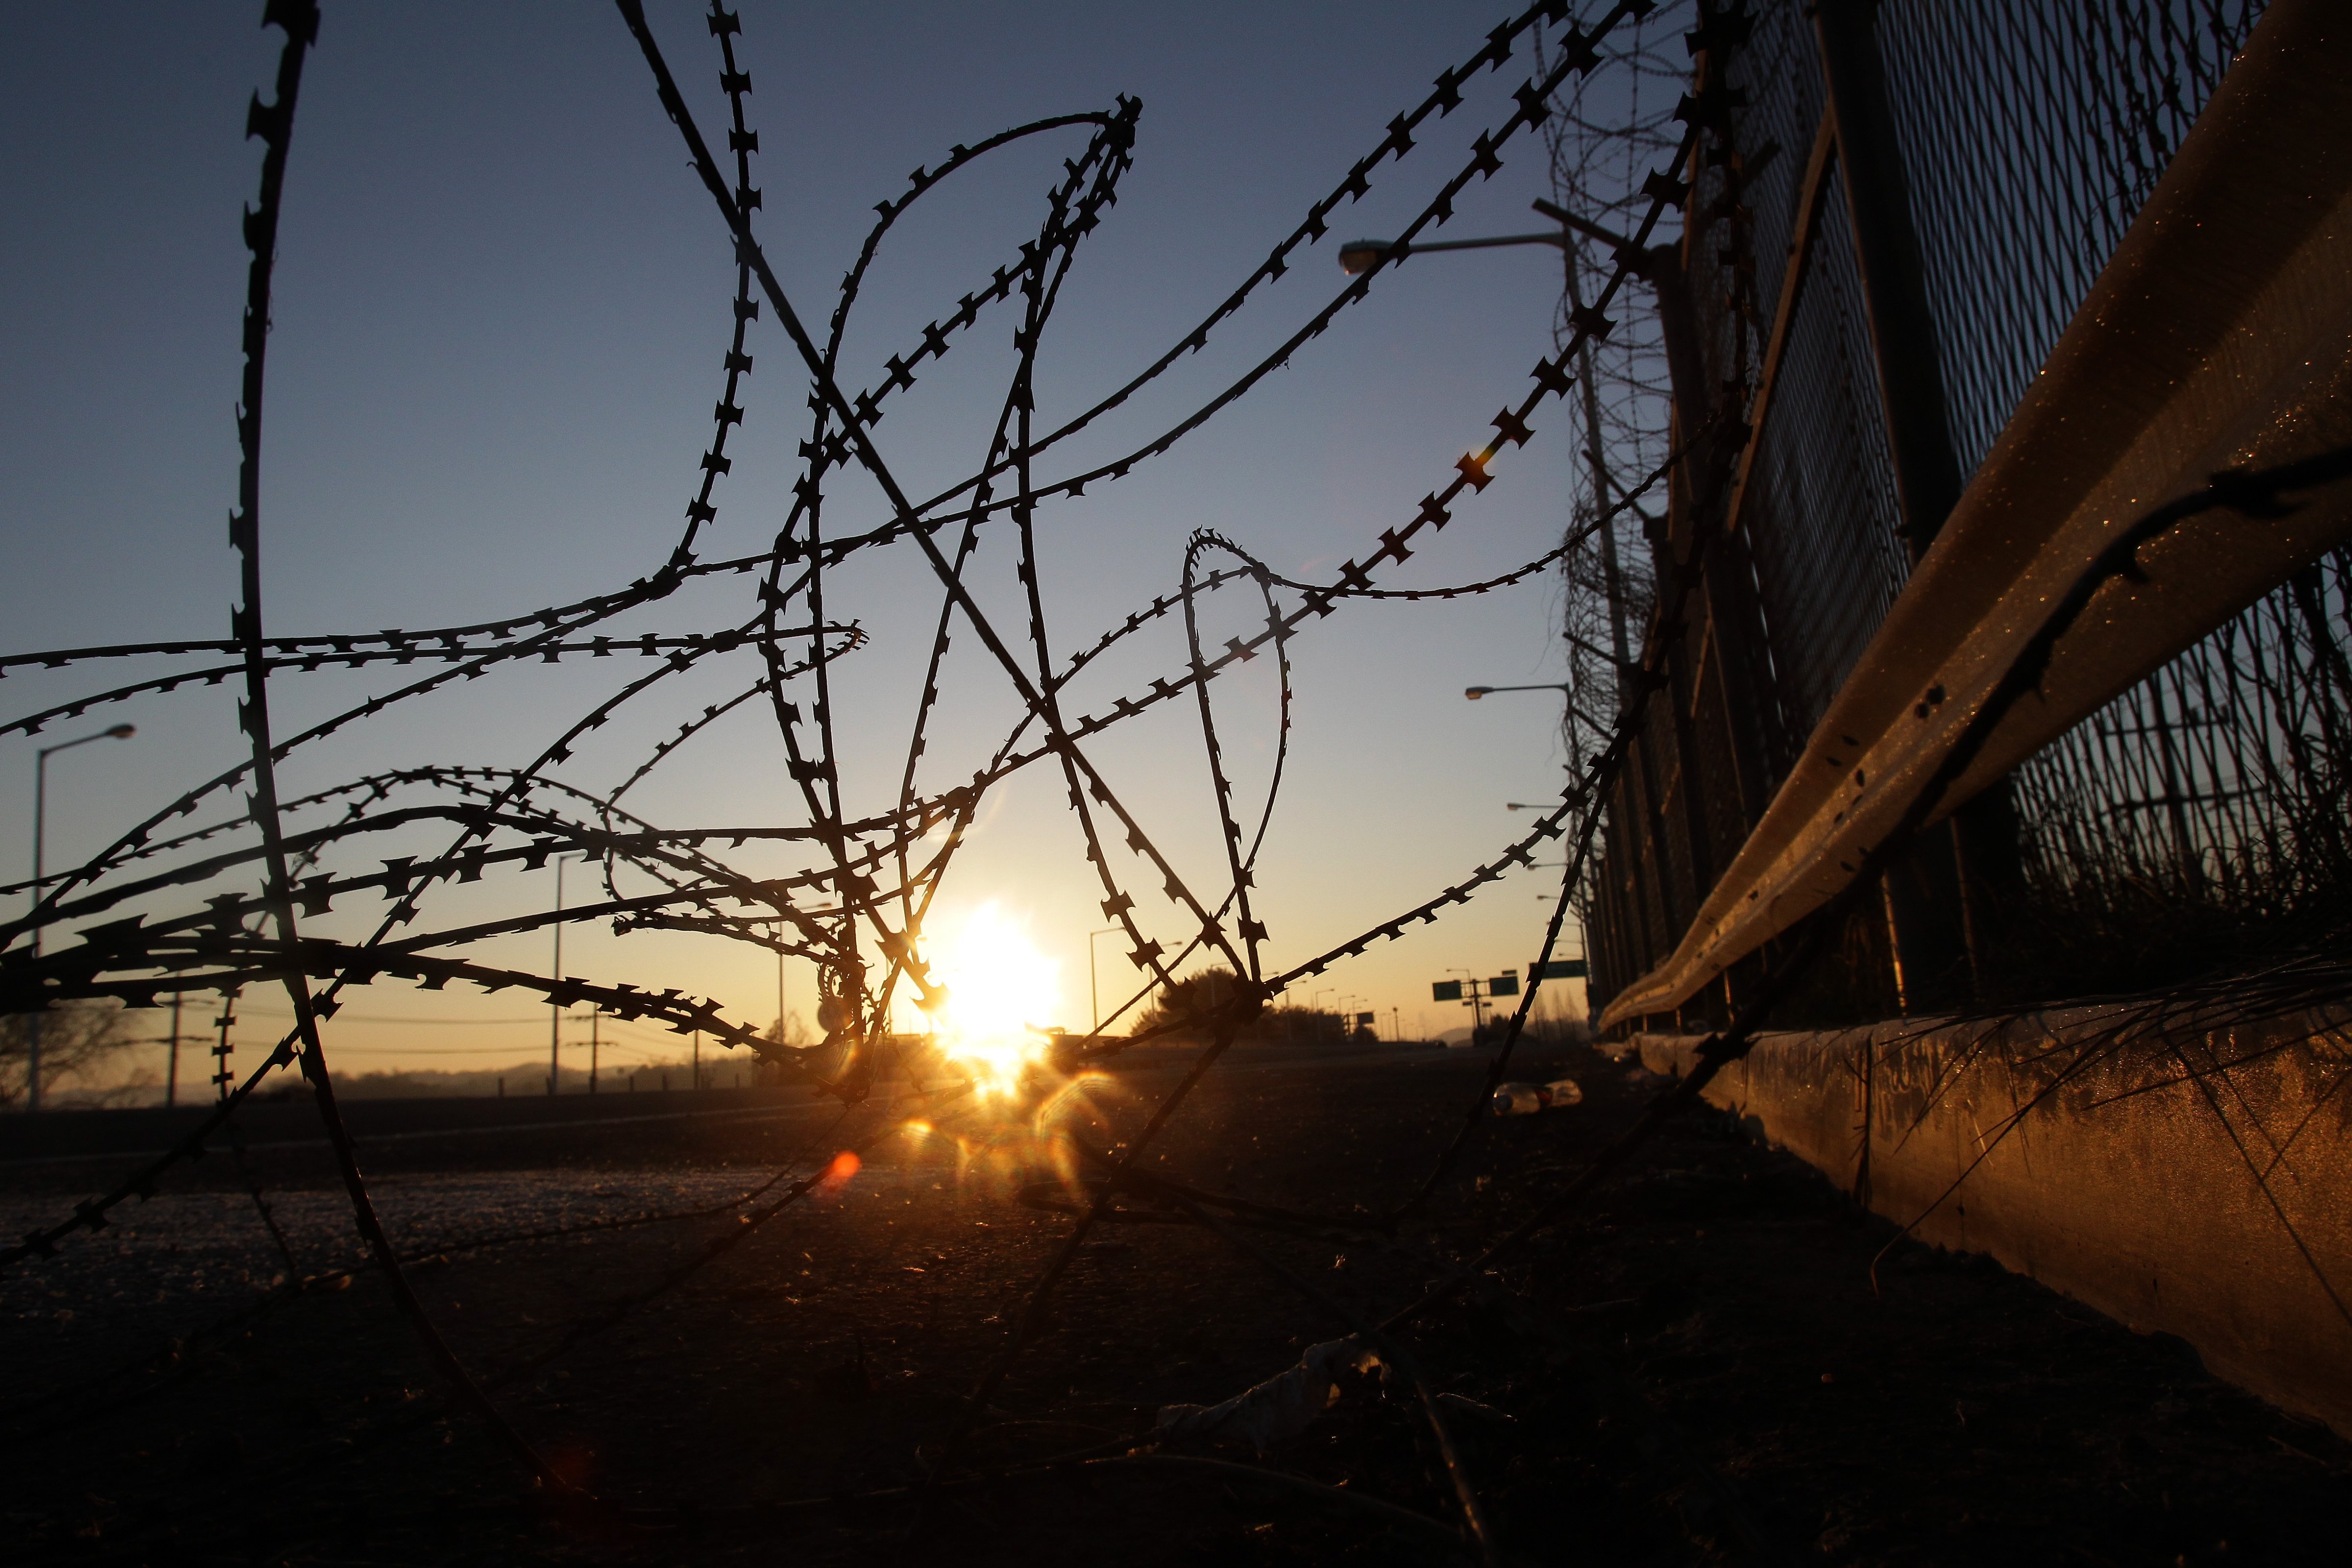 A sunrise is seen through a barbed-wire fence at the Imjingak, near the Demilitarized zone separating South and North Korea in Paju, South Korea, on Jan. 8, 2016.